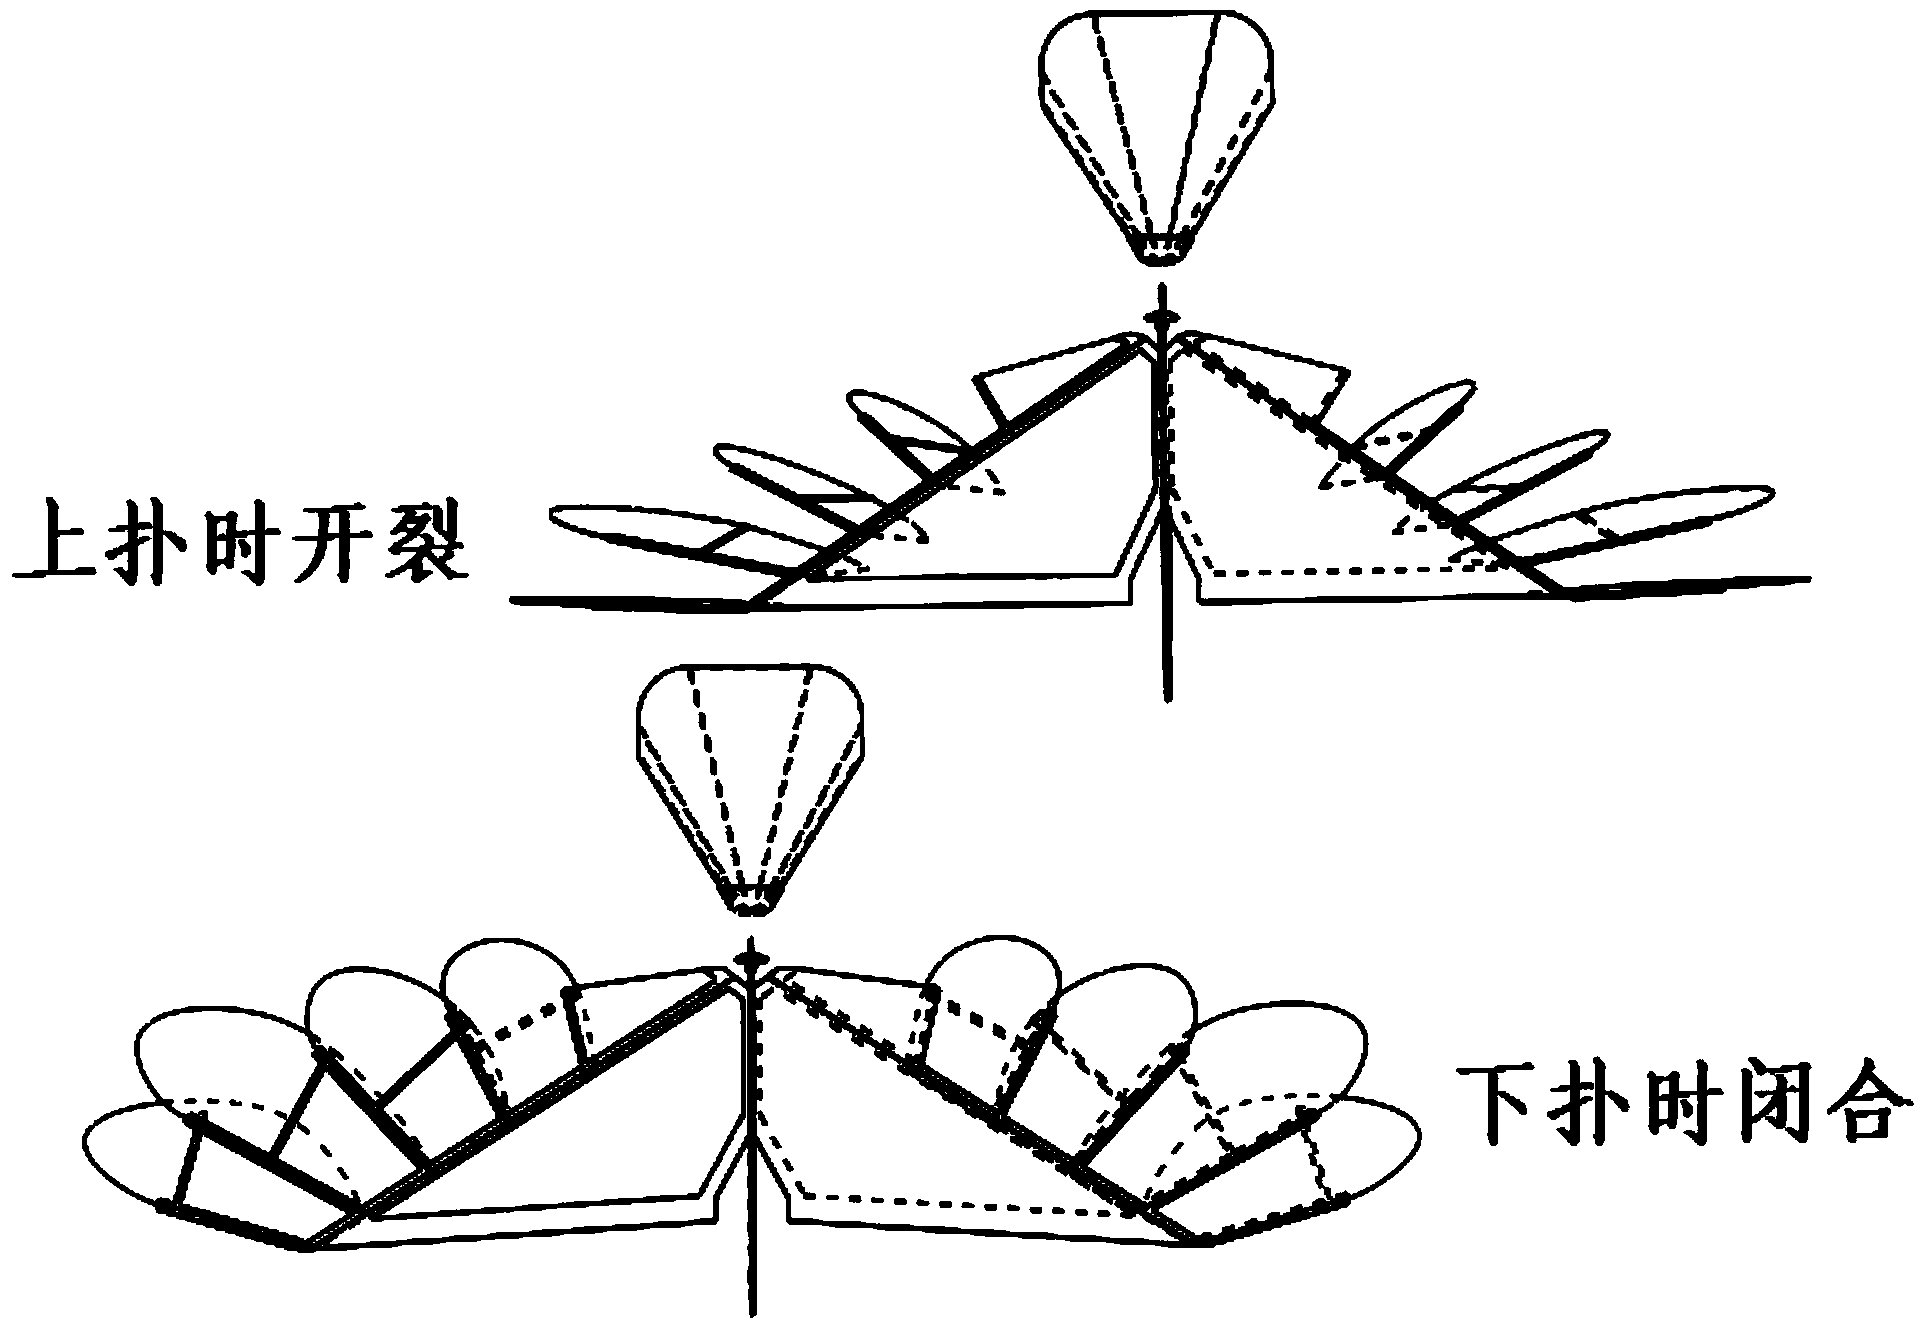 Feather cracking simulation lift enhancement mechanism of micro flapping aircraft